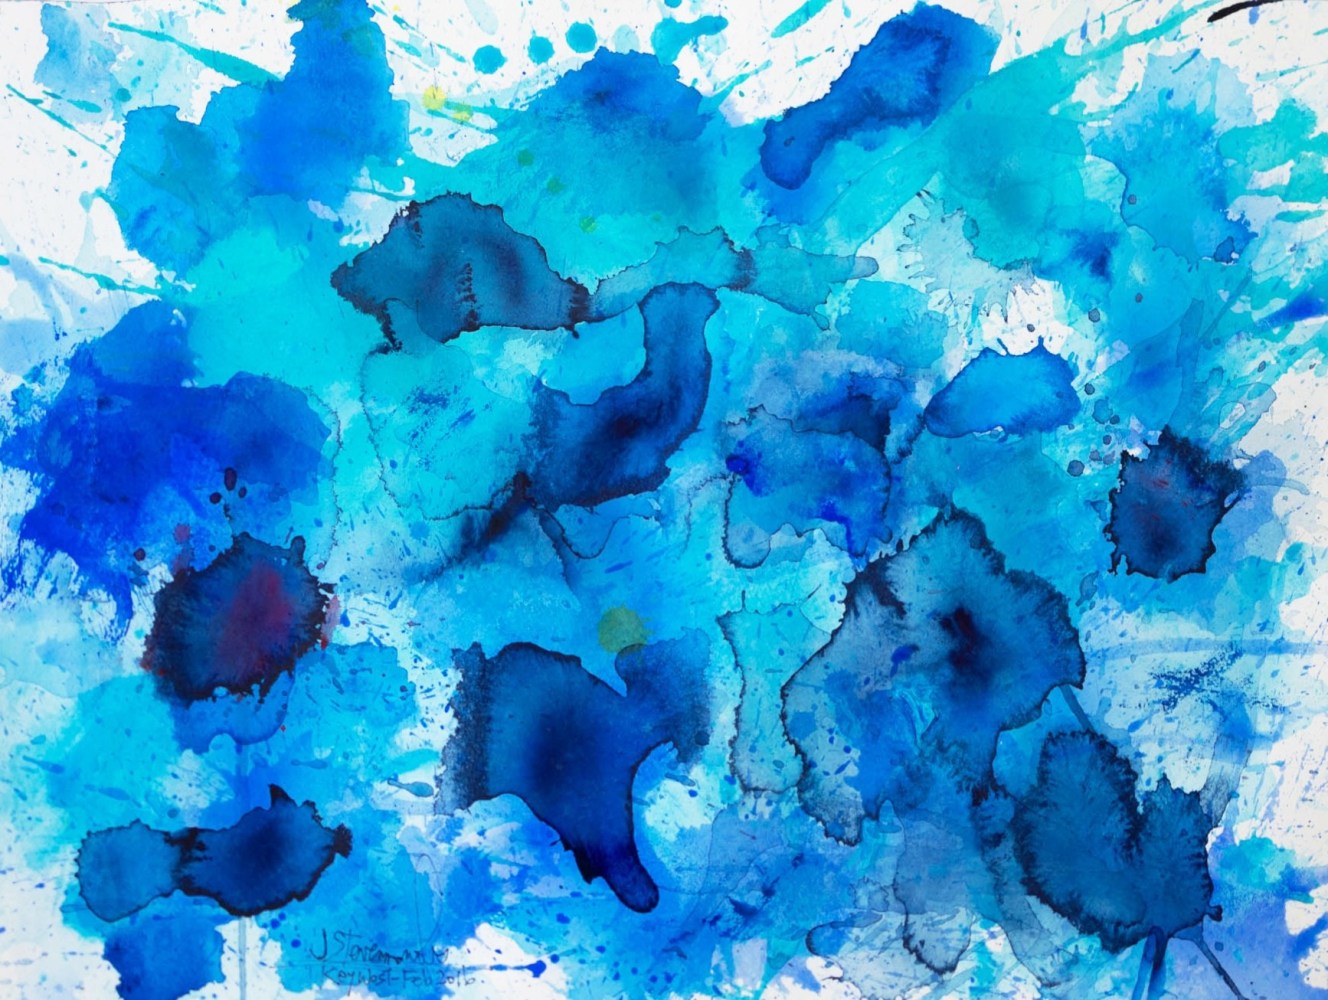 J. Steven Manolis, Splash (Key West), 12.18.14, 2016, Watercolor and Acrylic on paper, 12 x 18 inches, Blue abstract expressionism watercolor art